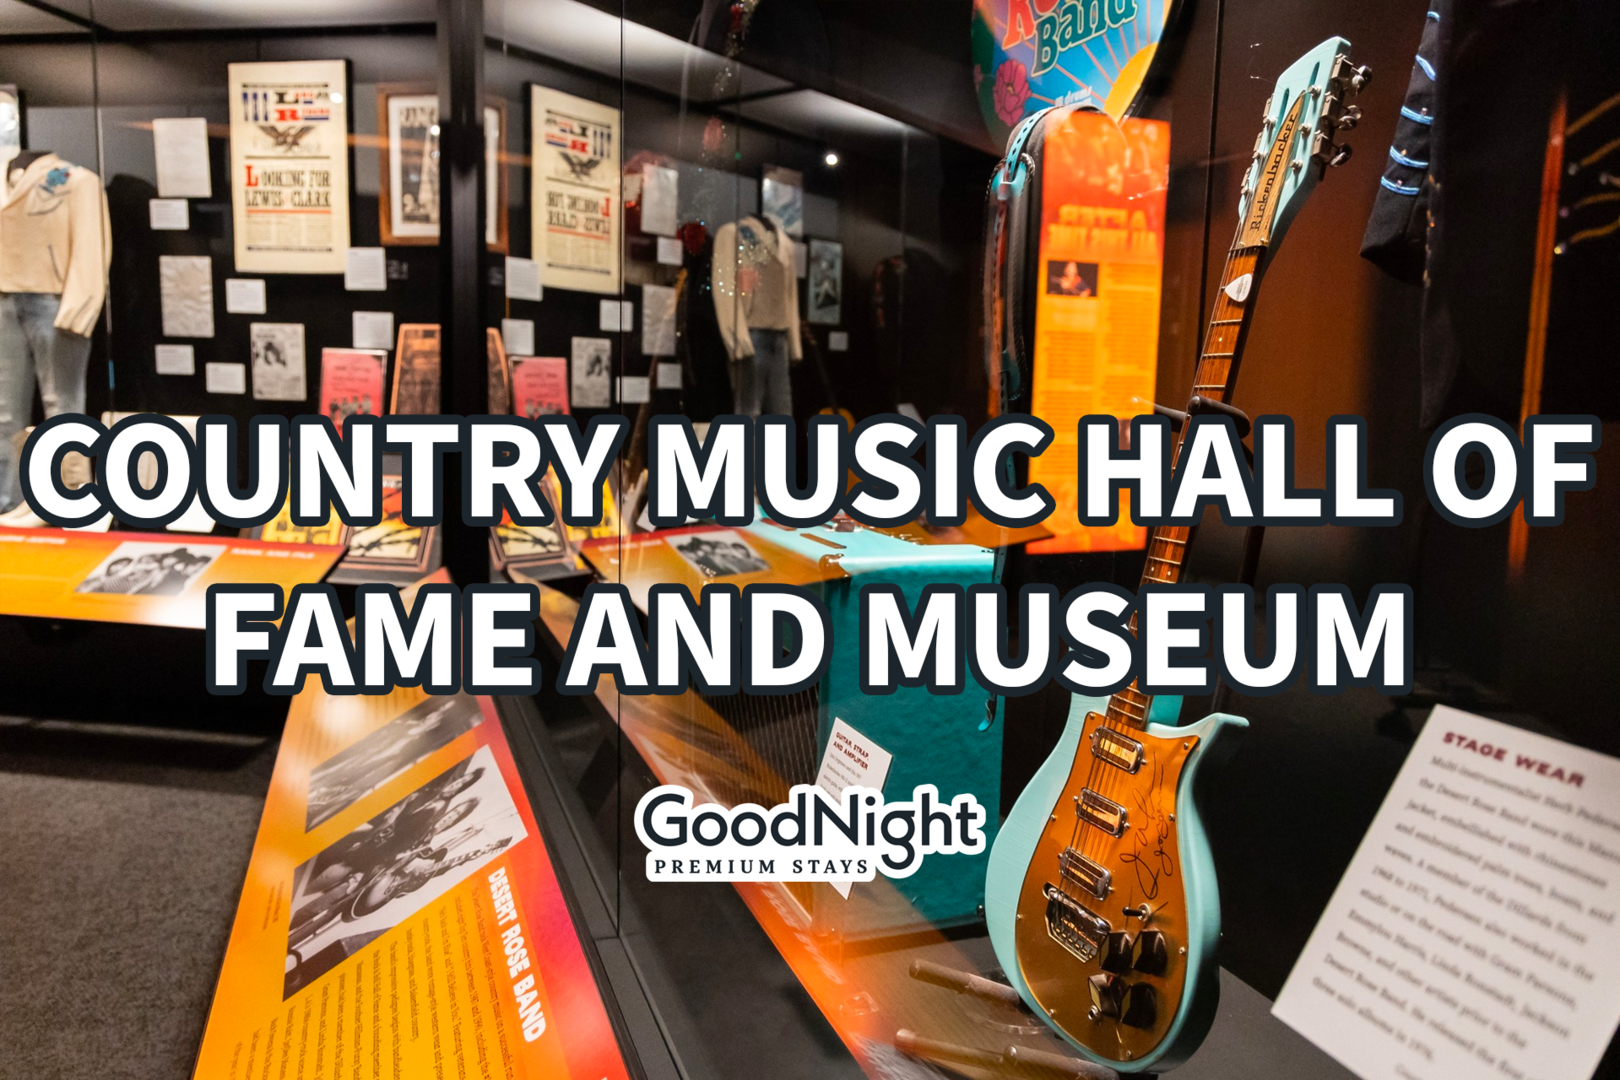 5 mins: Country Music Hall of Fame